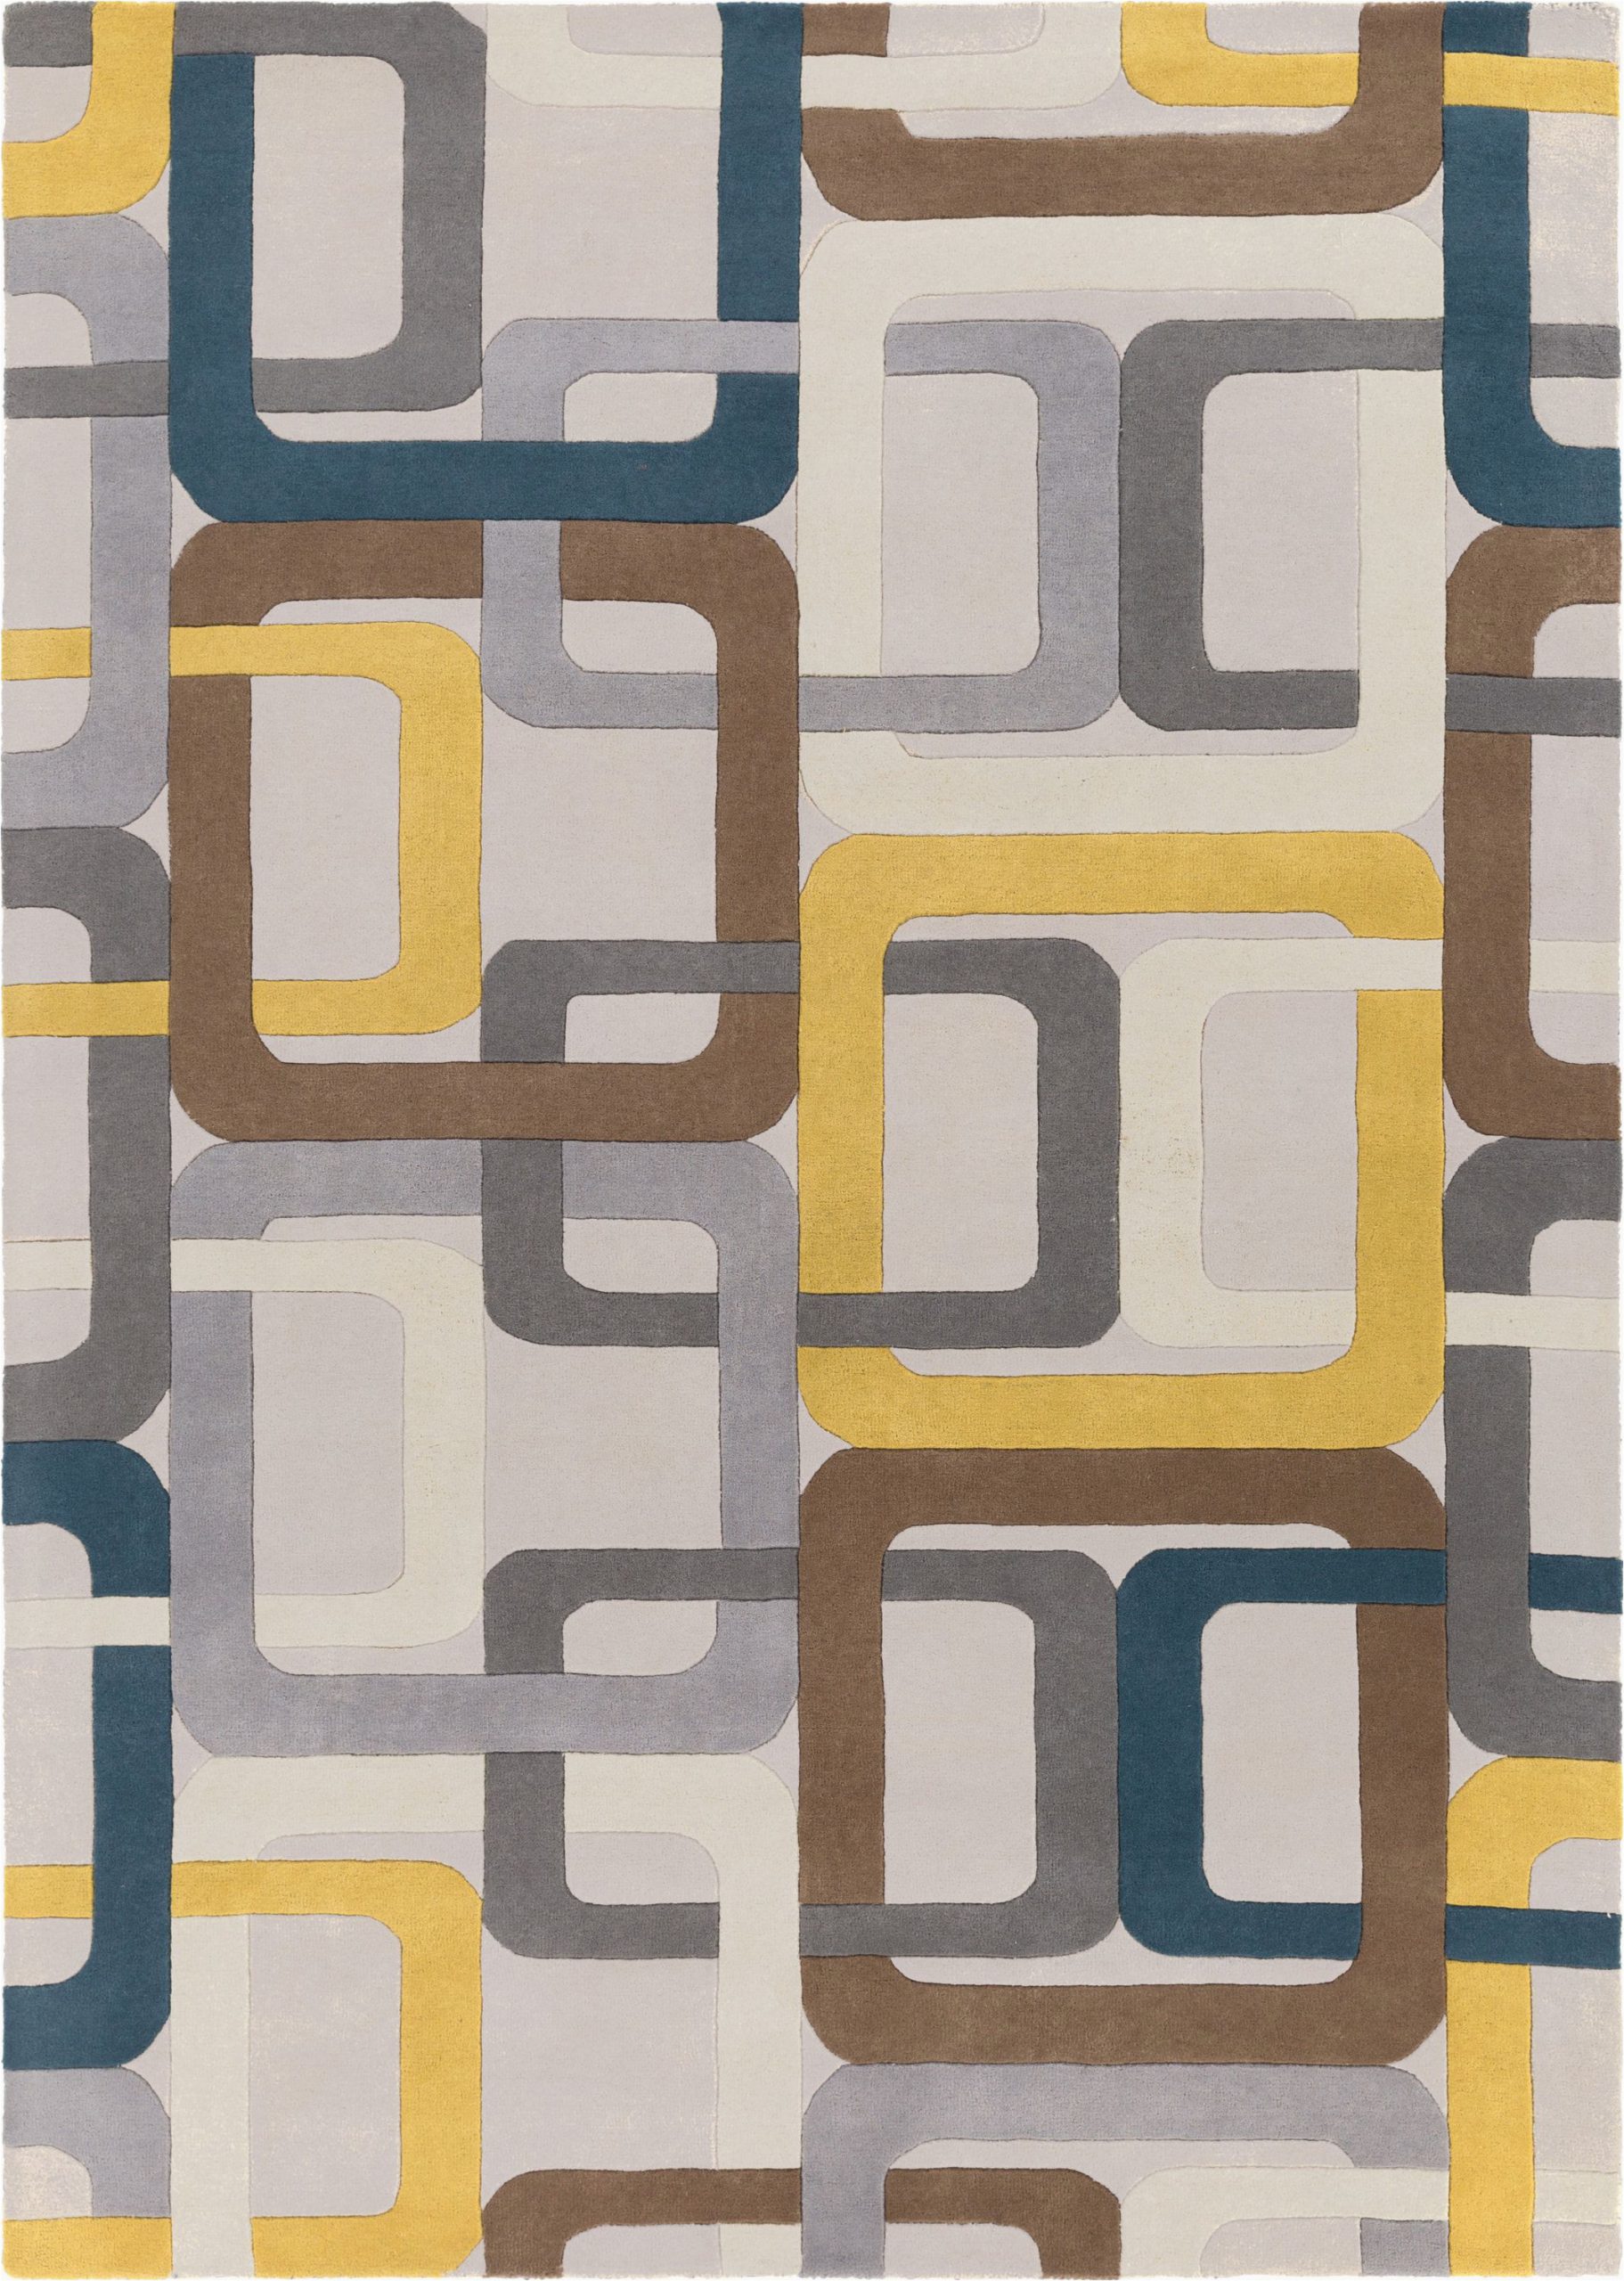 8 Ft Square area Rugs Fm 7159 Color Multi Size 8 X 10 Free form